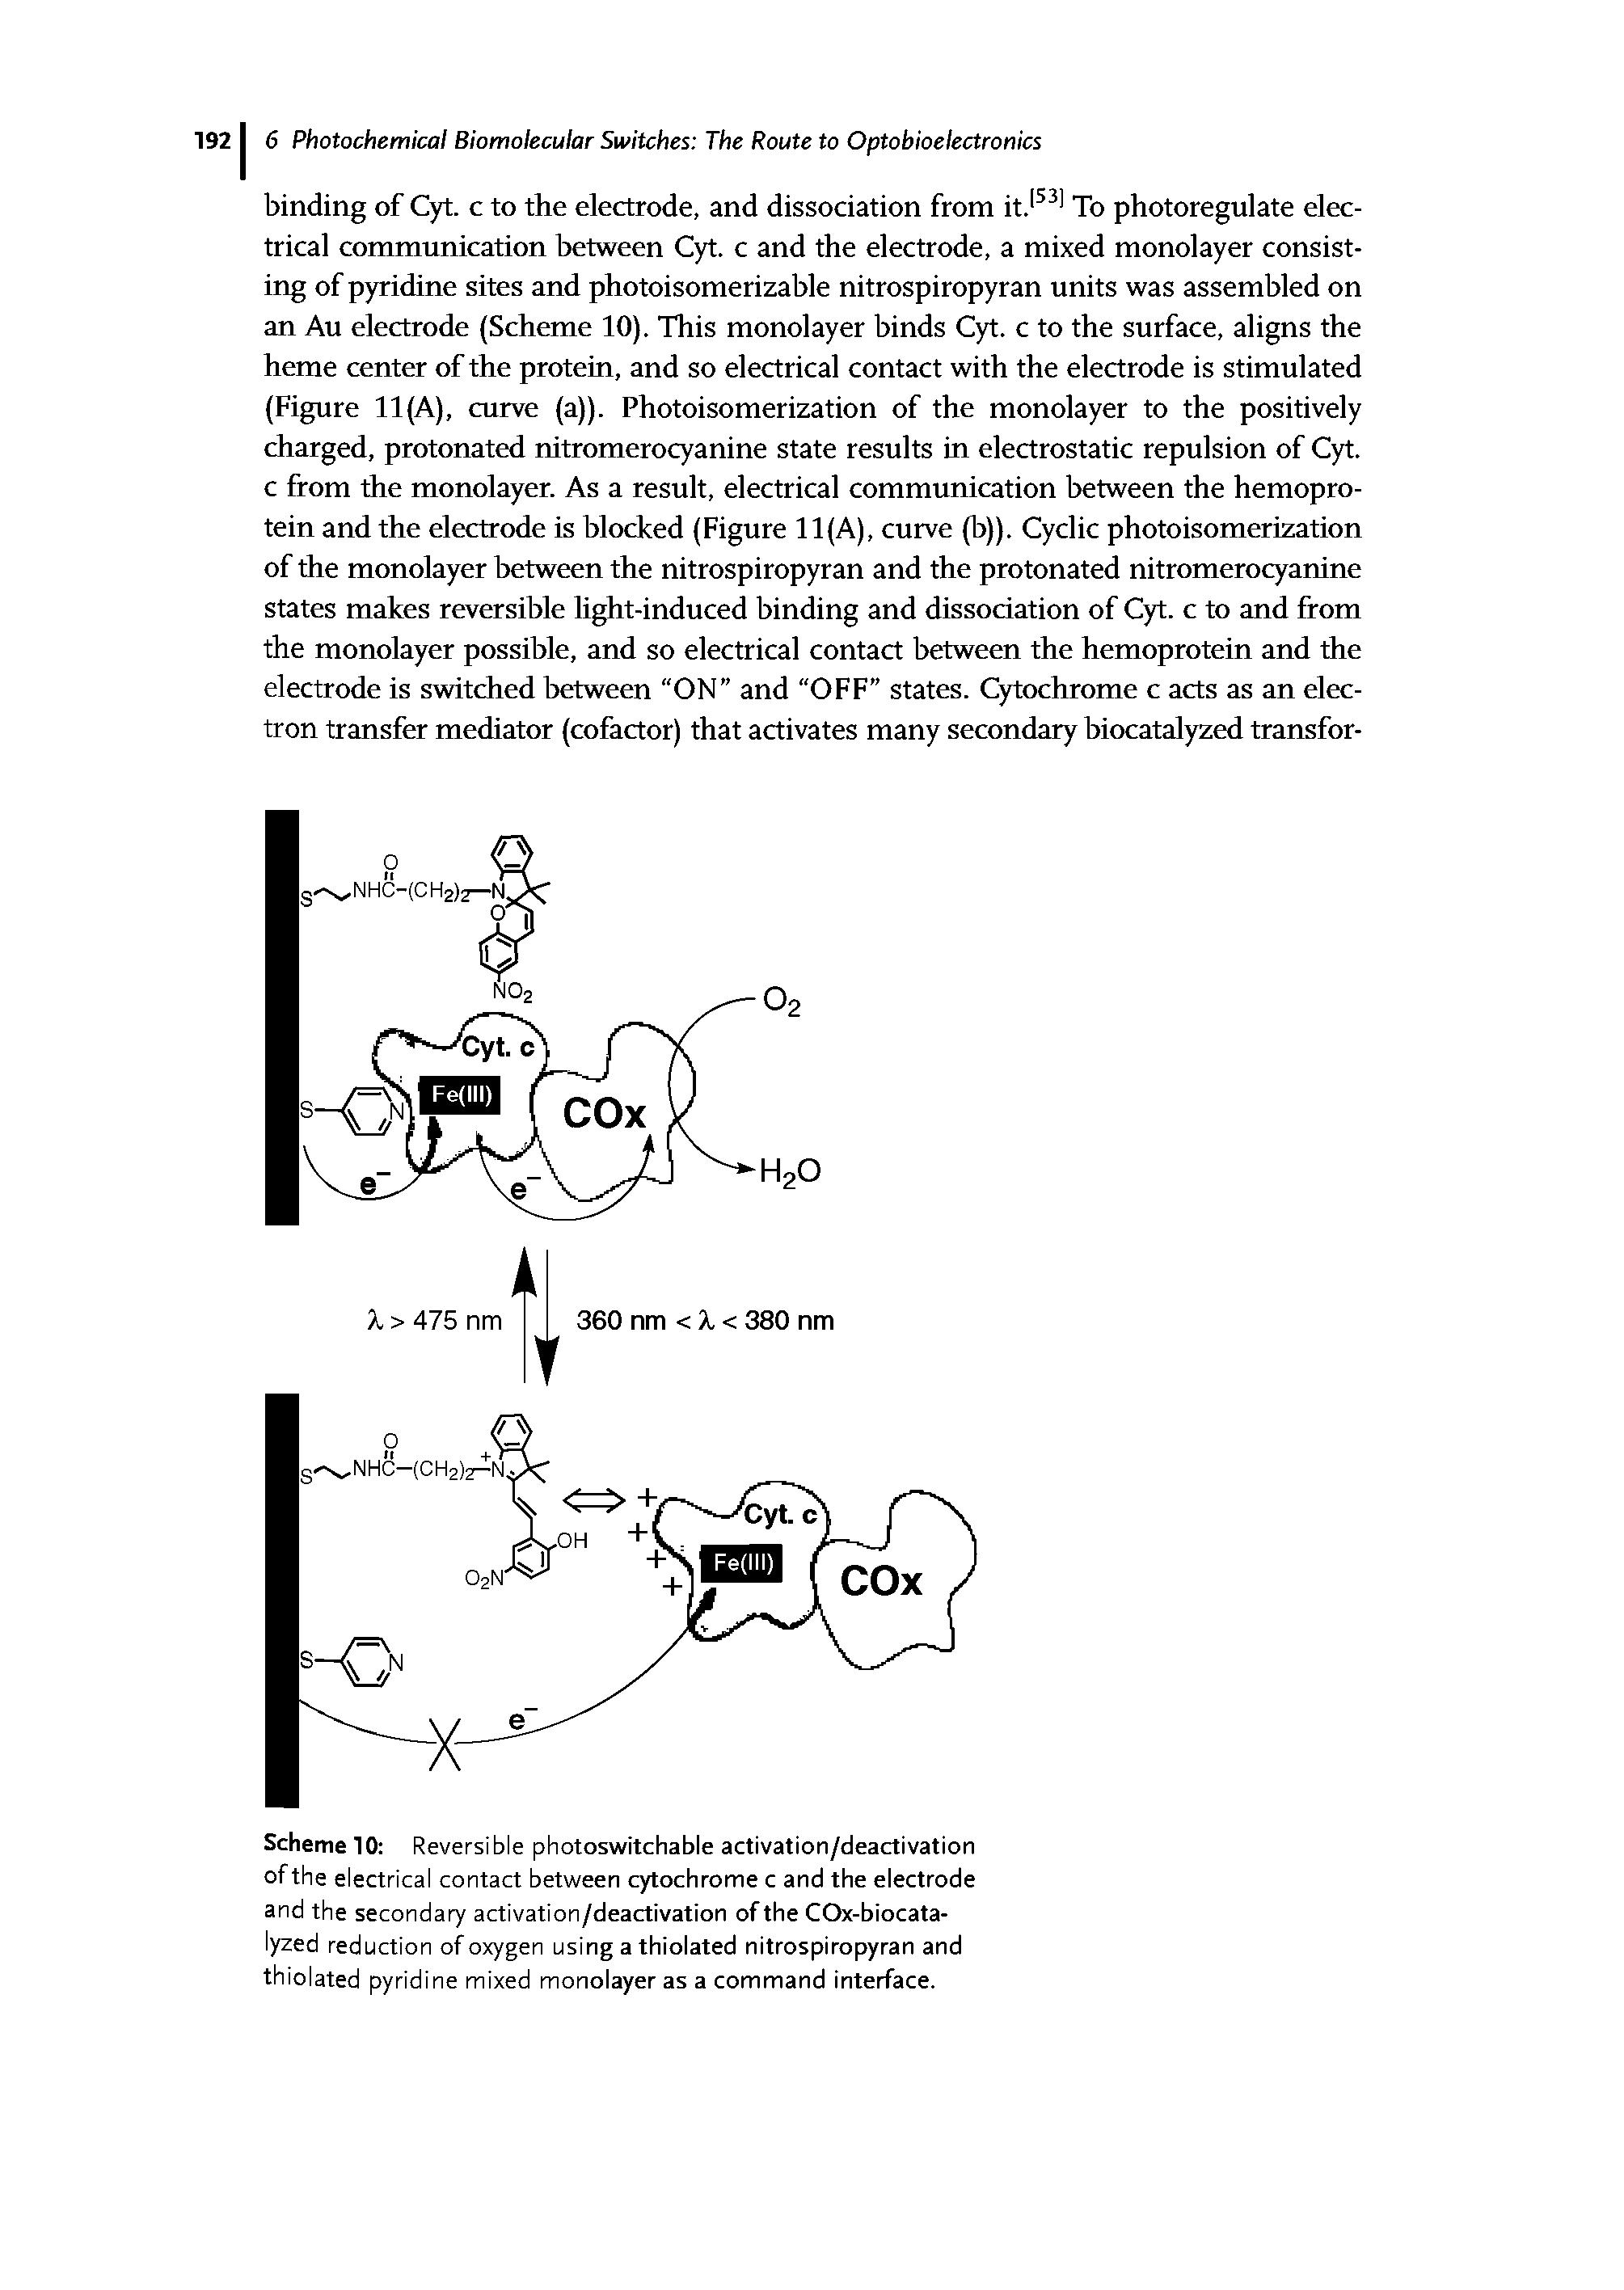 Scheme 10 Reversible photoswitchable activation/deactivation of the electrical contact between cytochrome c and the electrode and the secondary activation/deactivation of the COx-biocata-lyzed reduction of oxygen using a thiolated nitrospiropyran and thiolated pyridine mixed monolayer as a command interface.